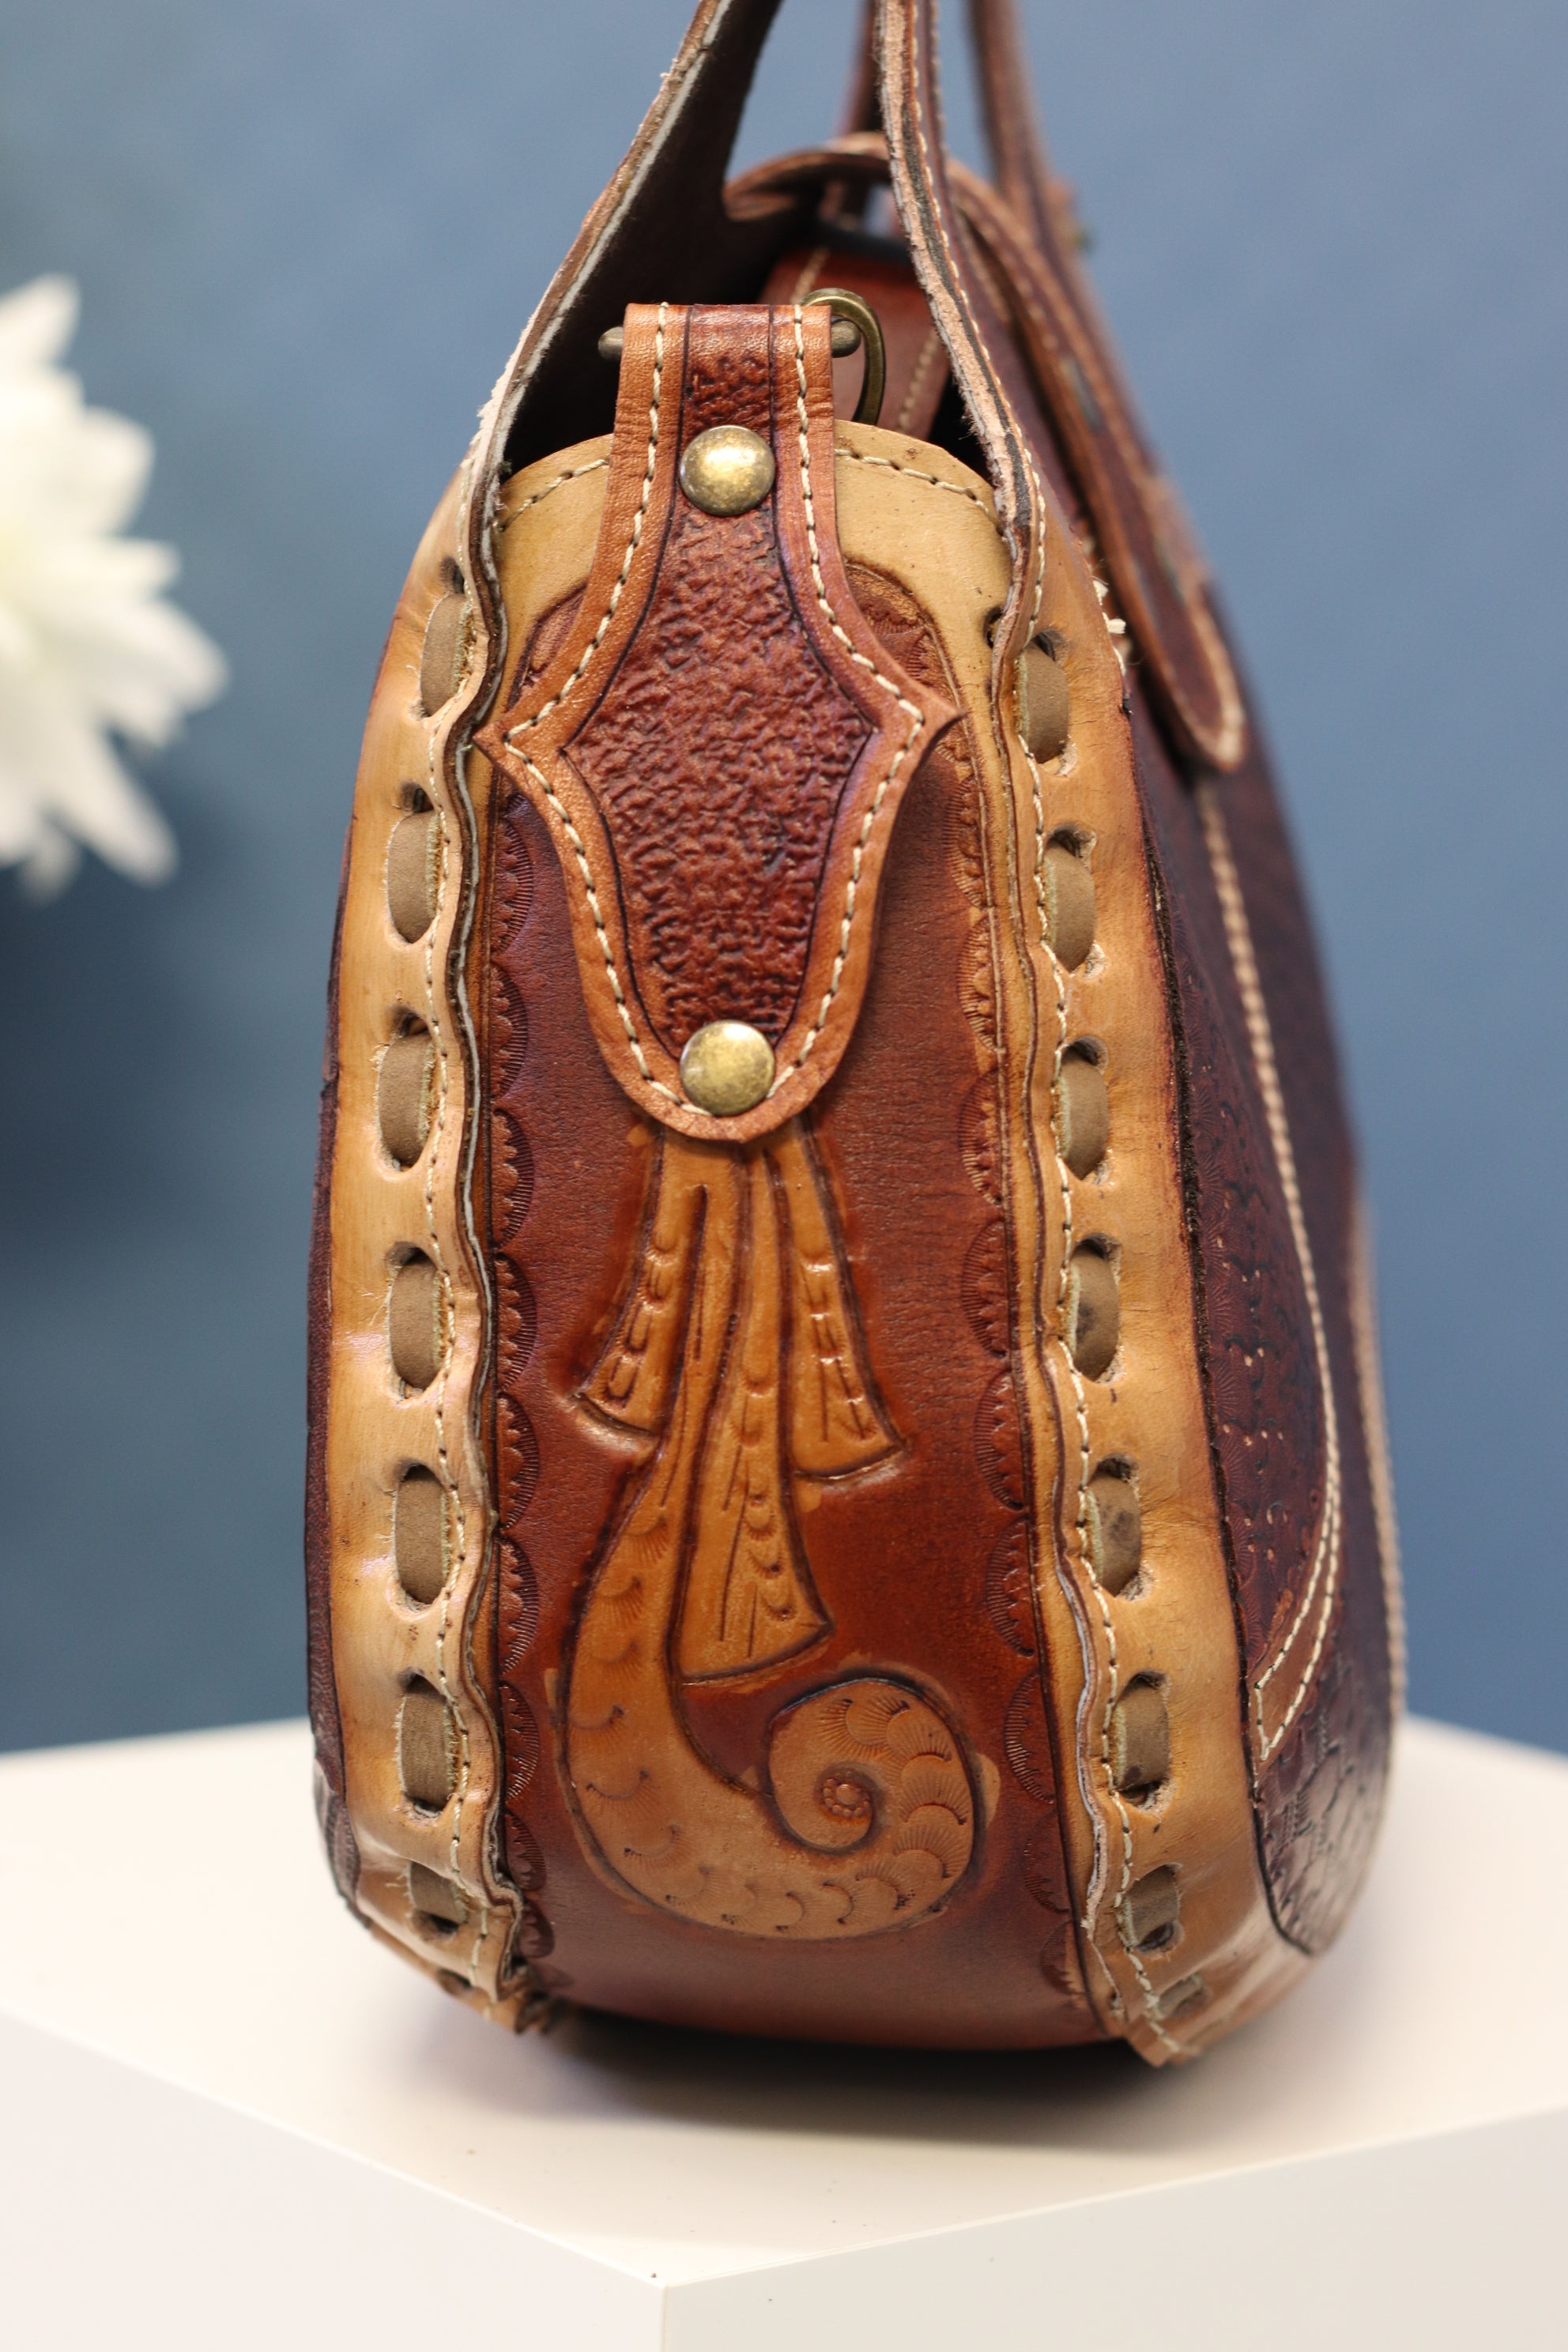 Brown Leather hand-tooled leather bag, purse, tote. Handbag top handled bag. Made by artisans in Central Mexico, shipping from the USA. A beautiful work of art. Buy Now at www.felipeandgrace.com